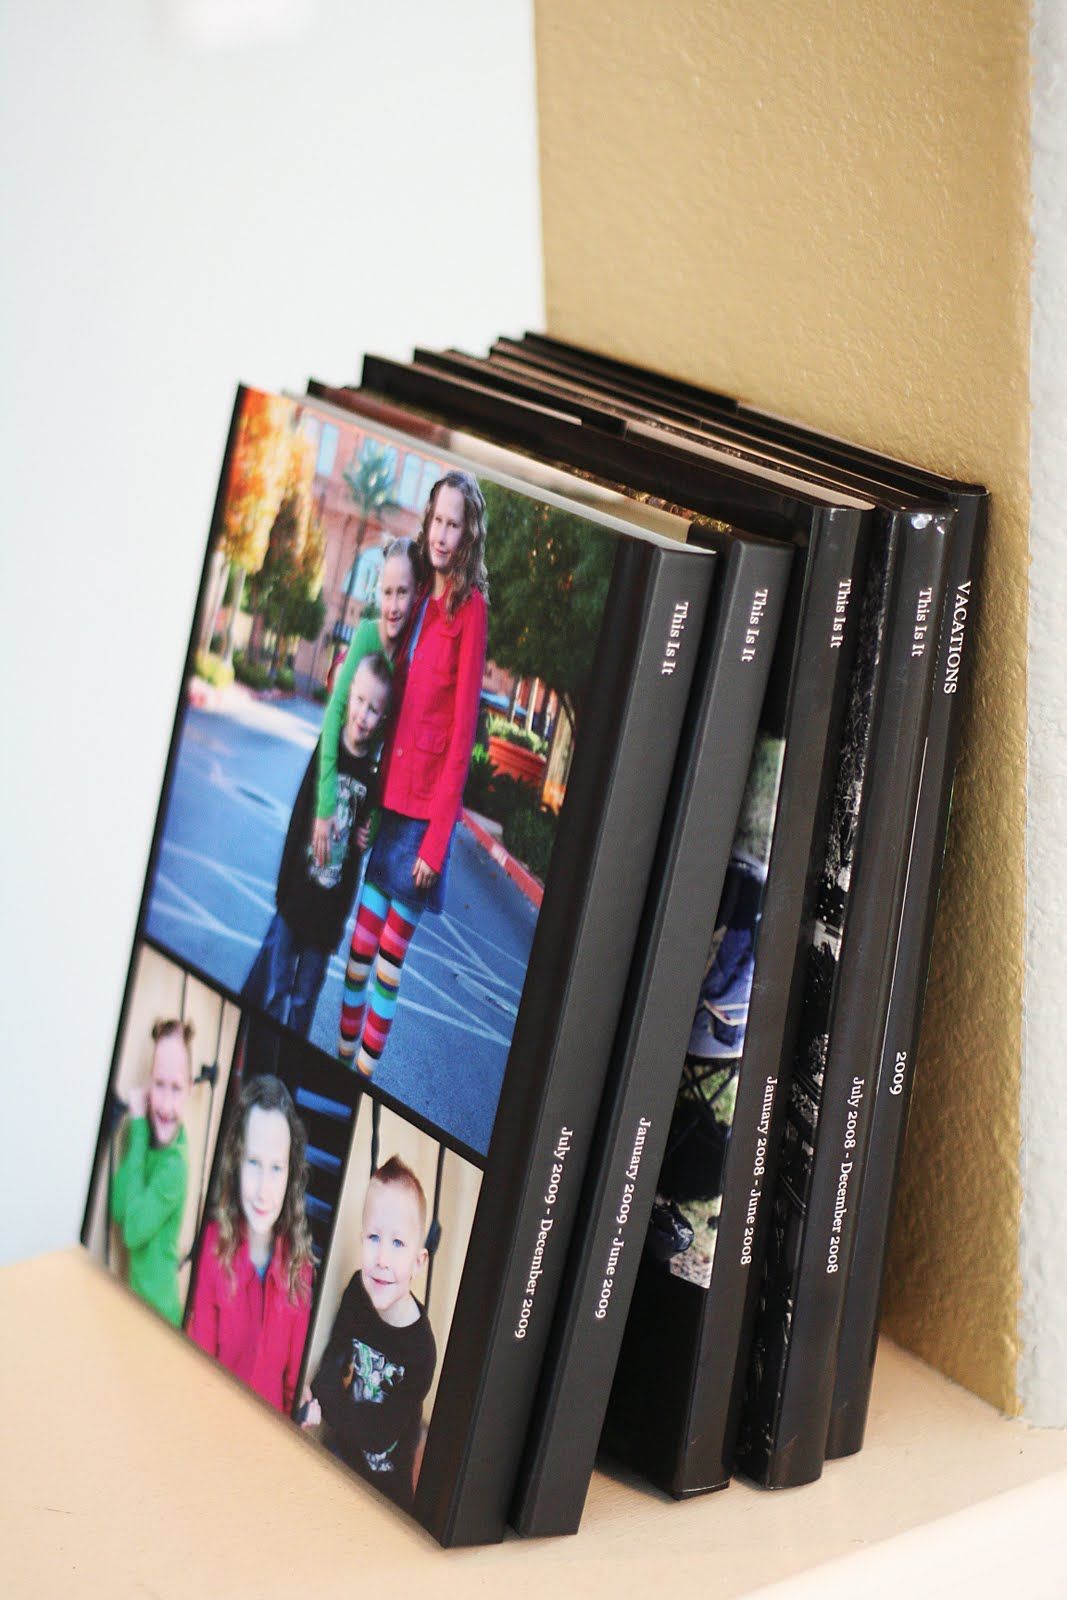 Family yearbooks. I love this idea!